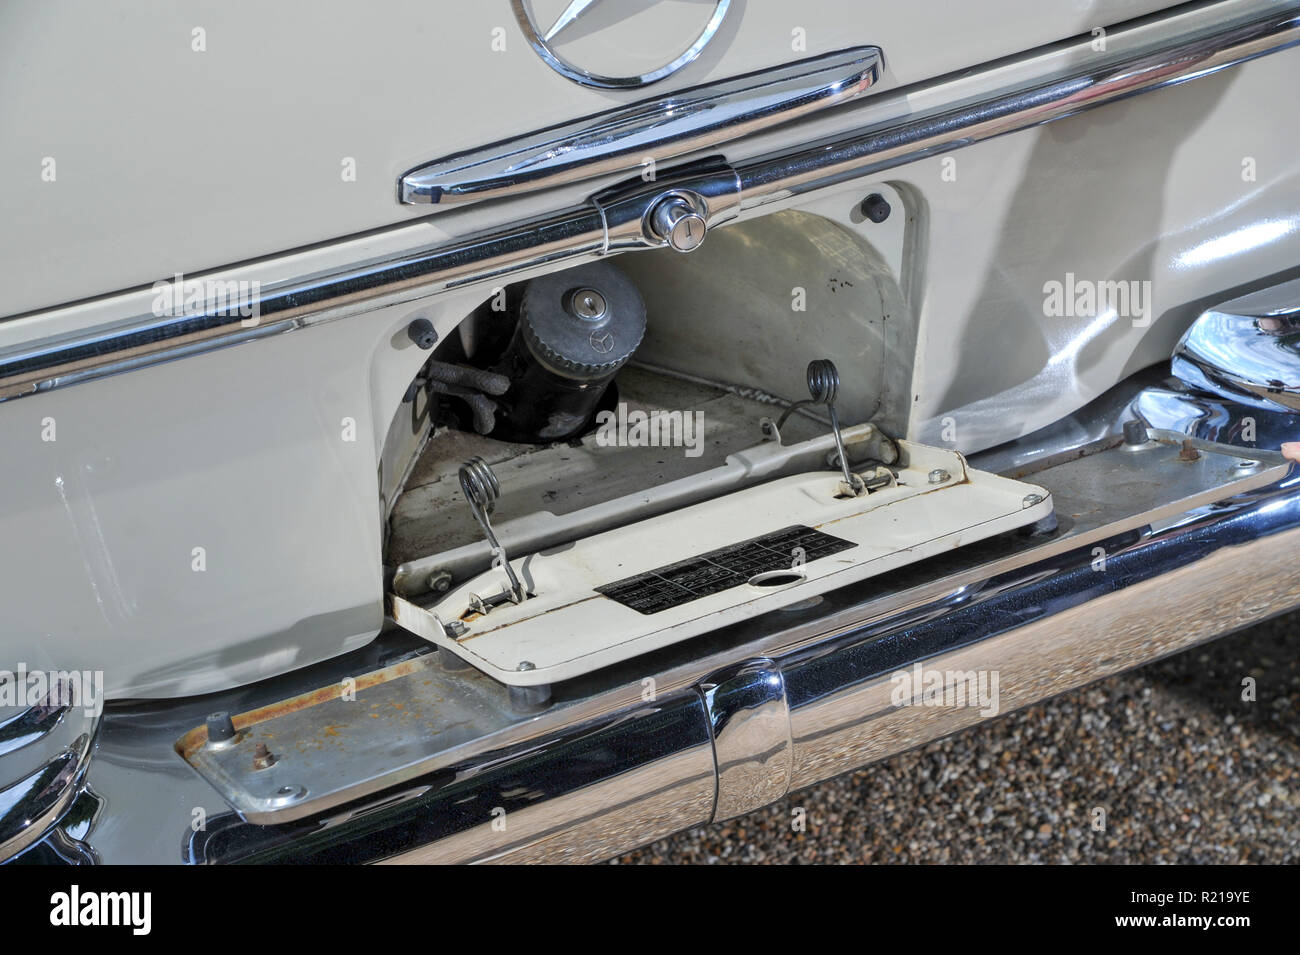 fuel filler behind number plate on a 1964 Mercedes Benz 220 SE convertible  classic German luxury car Stock Photo - Alamy